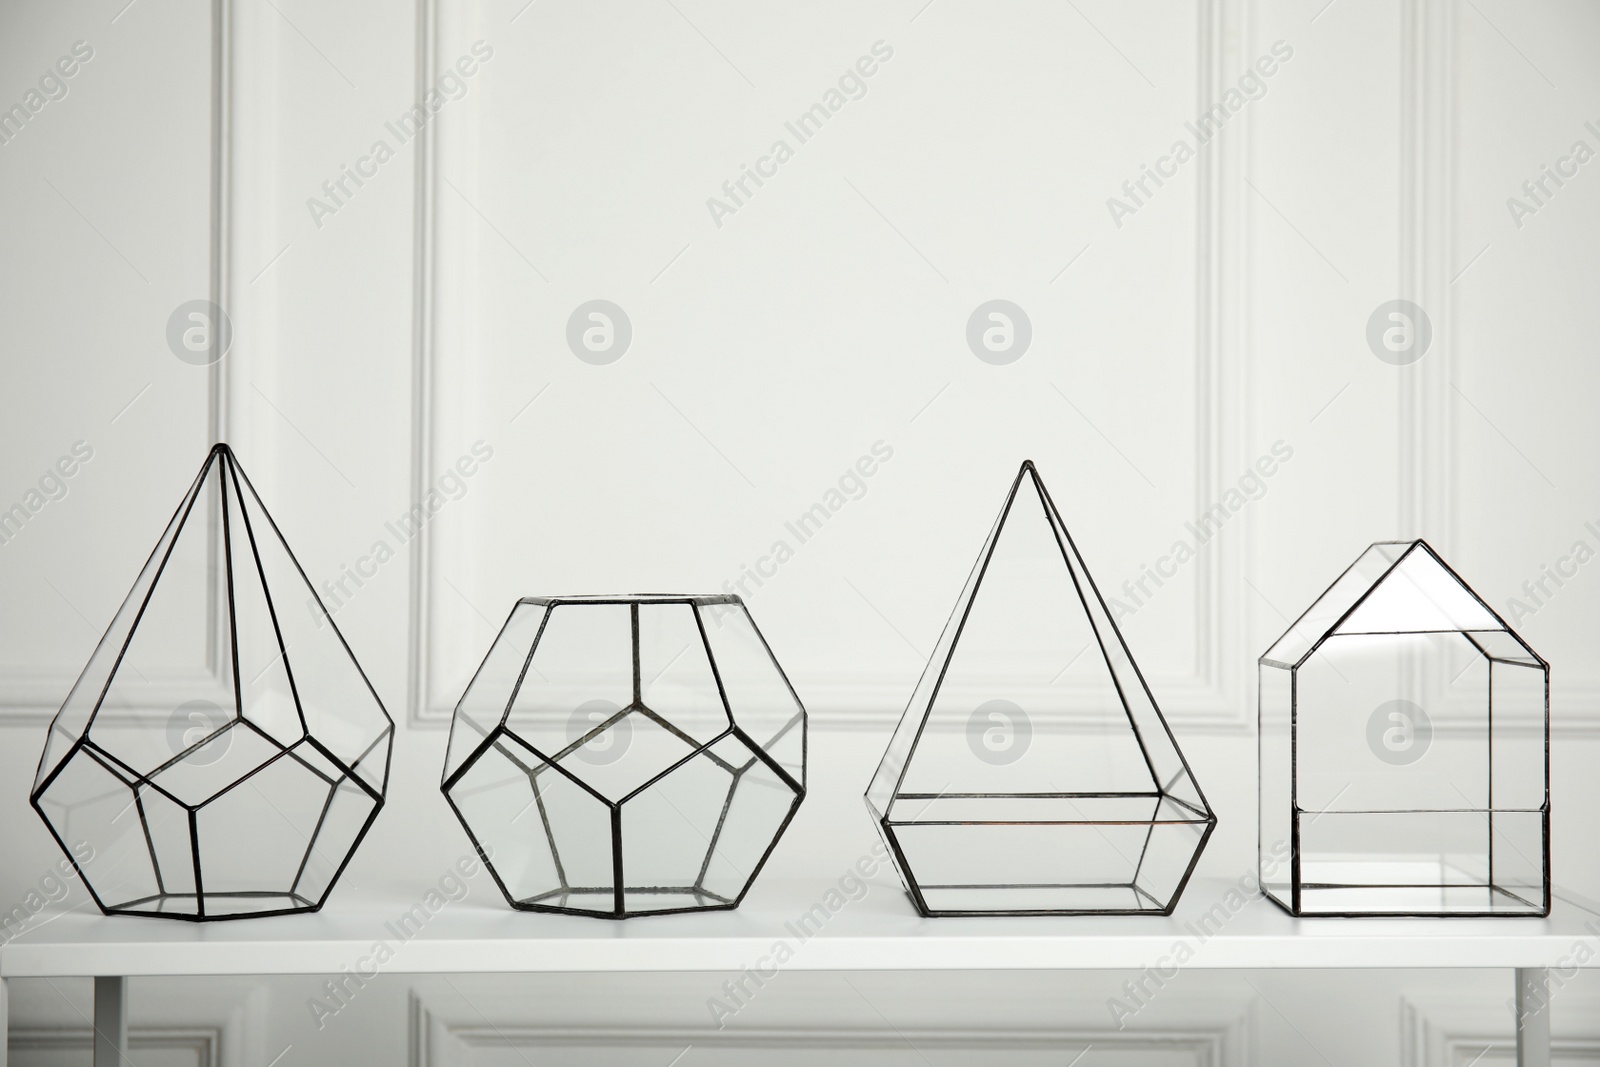 Photo of Empty glass florarium vases on white table indoors